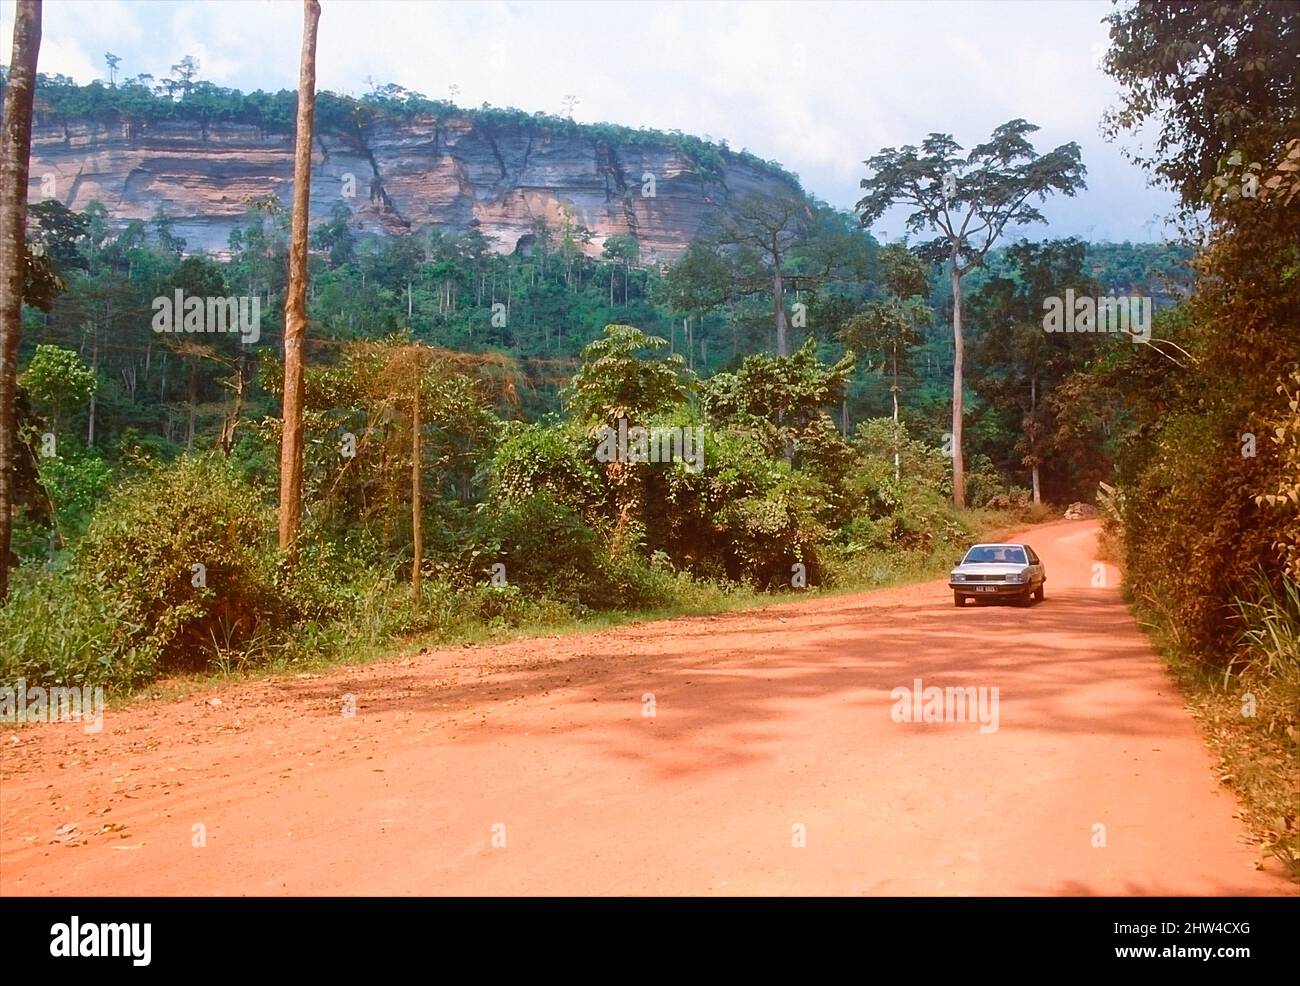 Dust road through the hinterland in Ghana, West Africa. Stock Photo